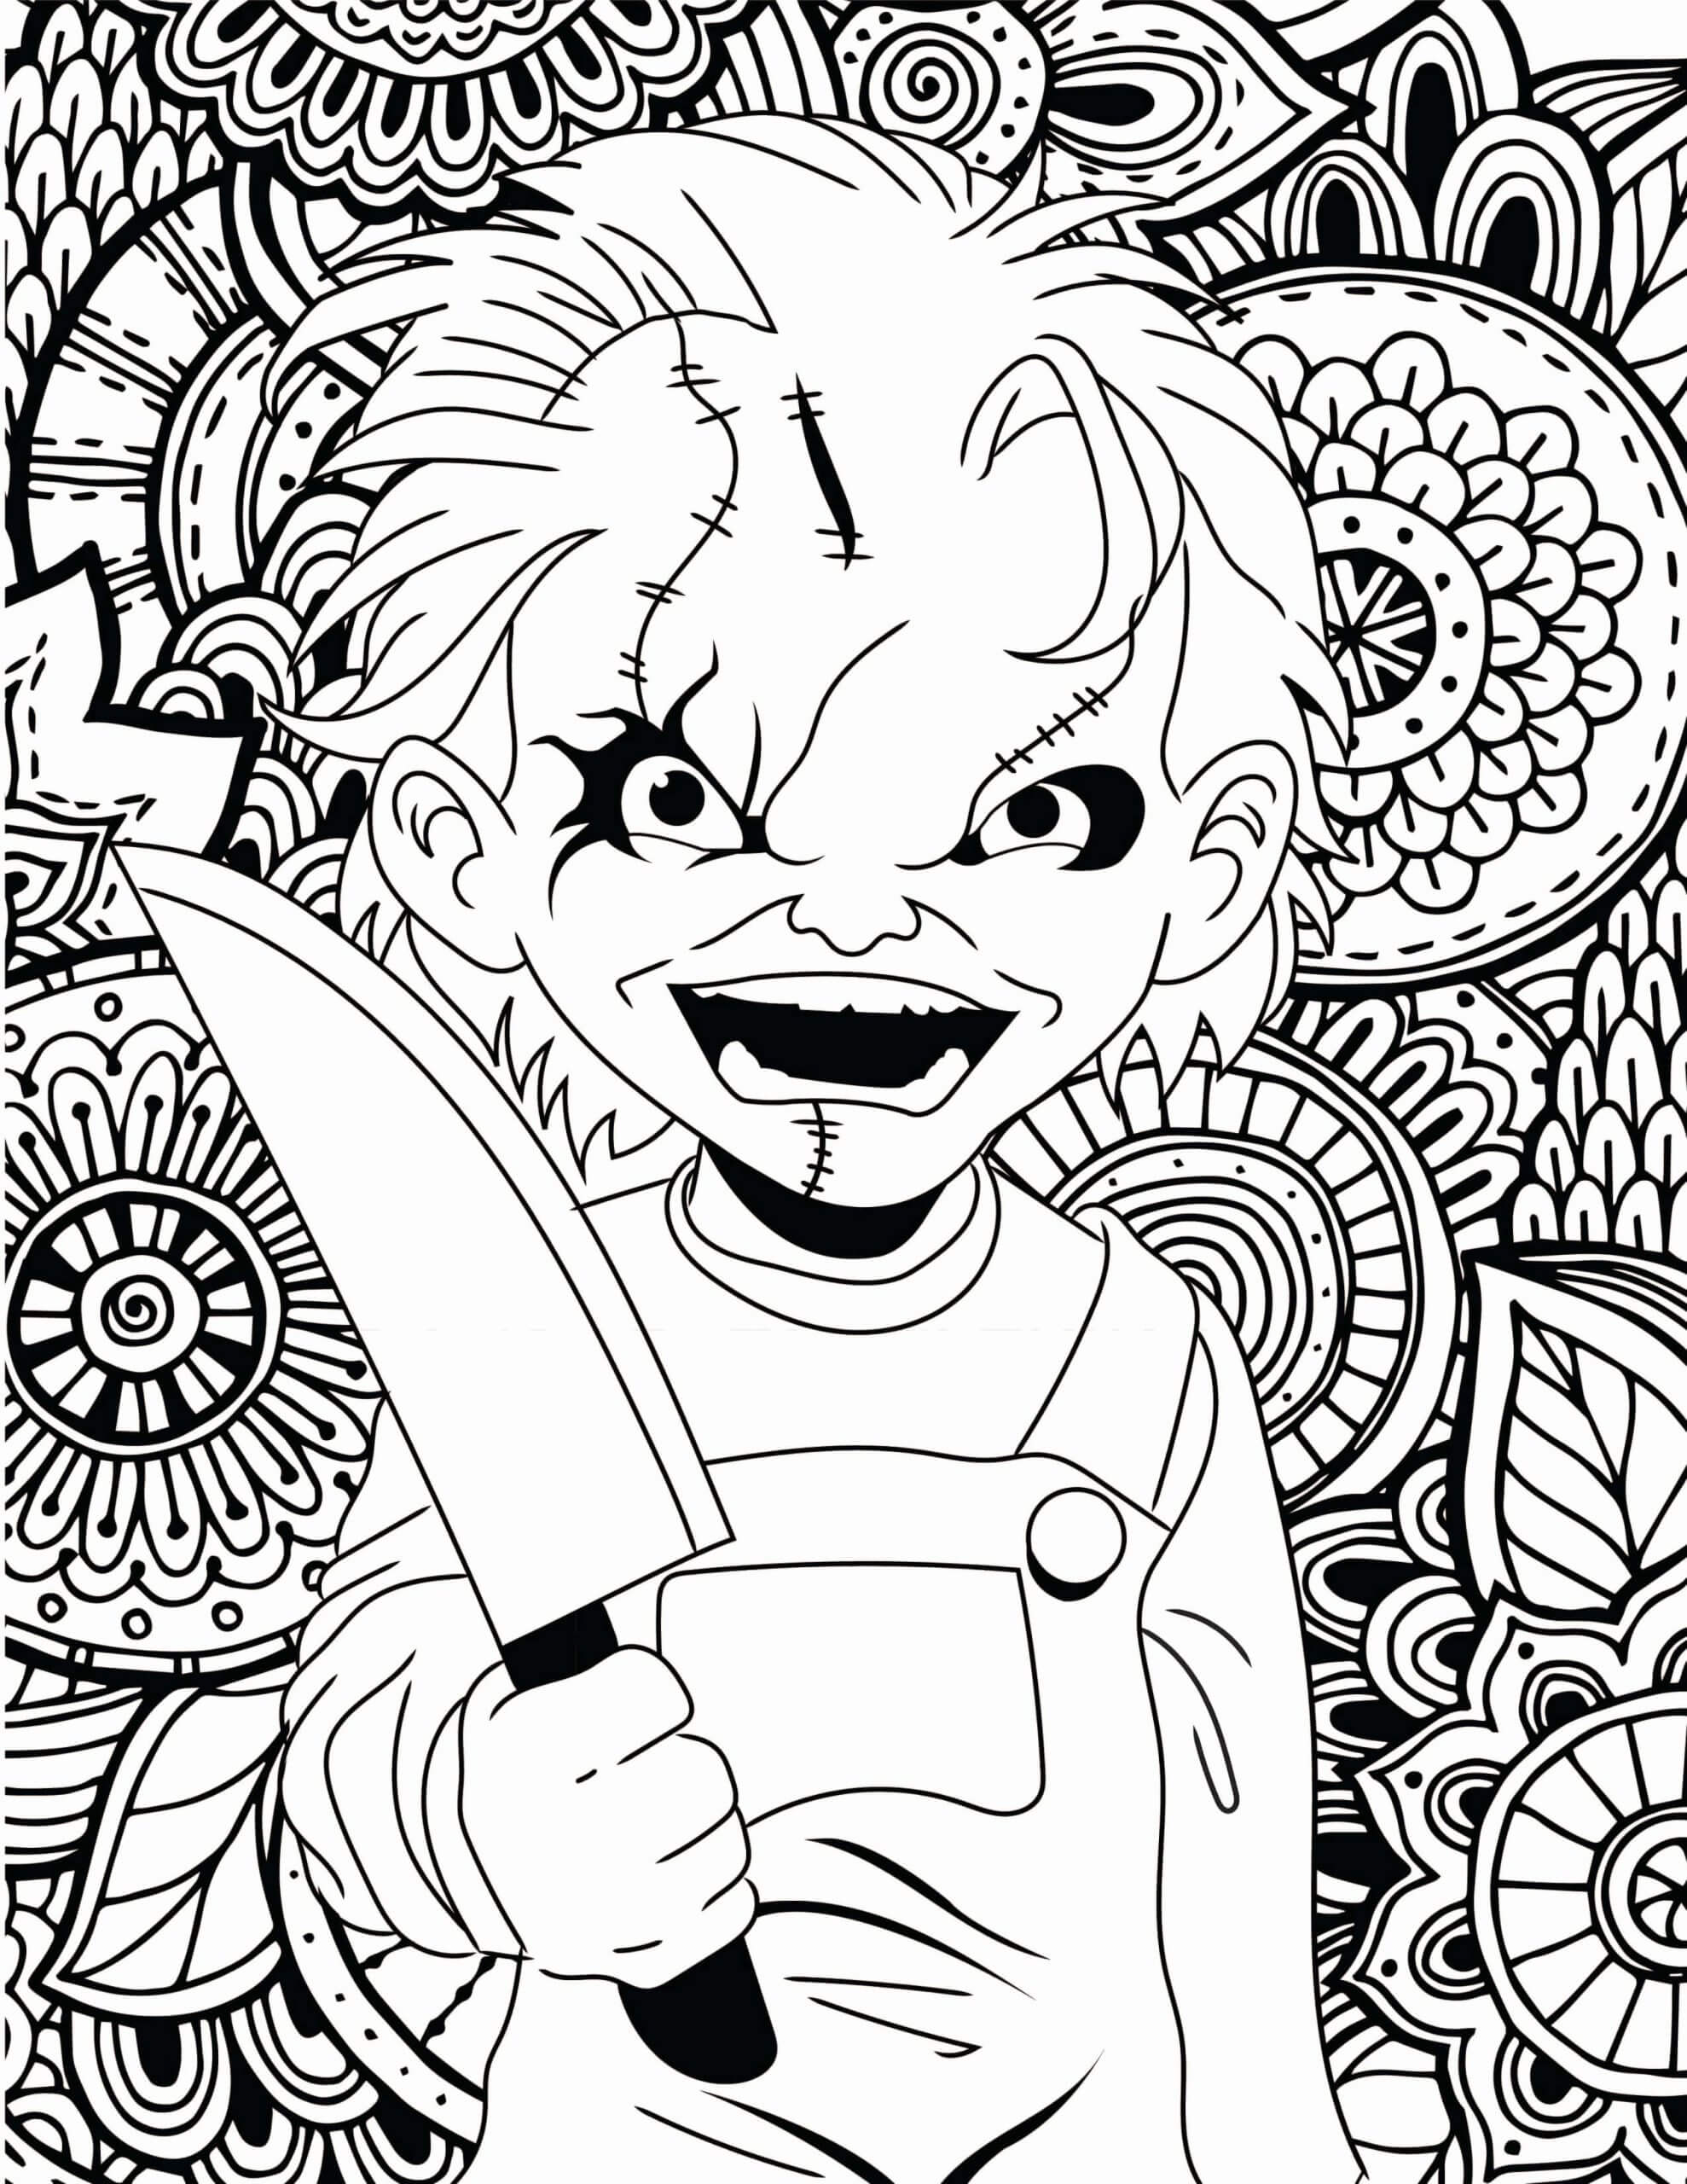 Chucky coloring page